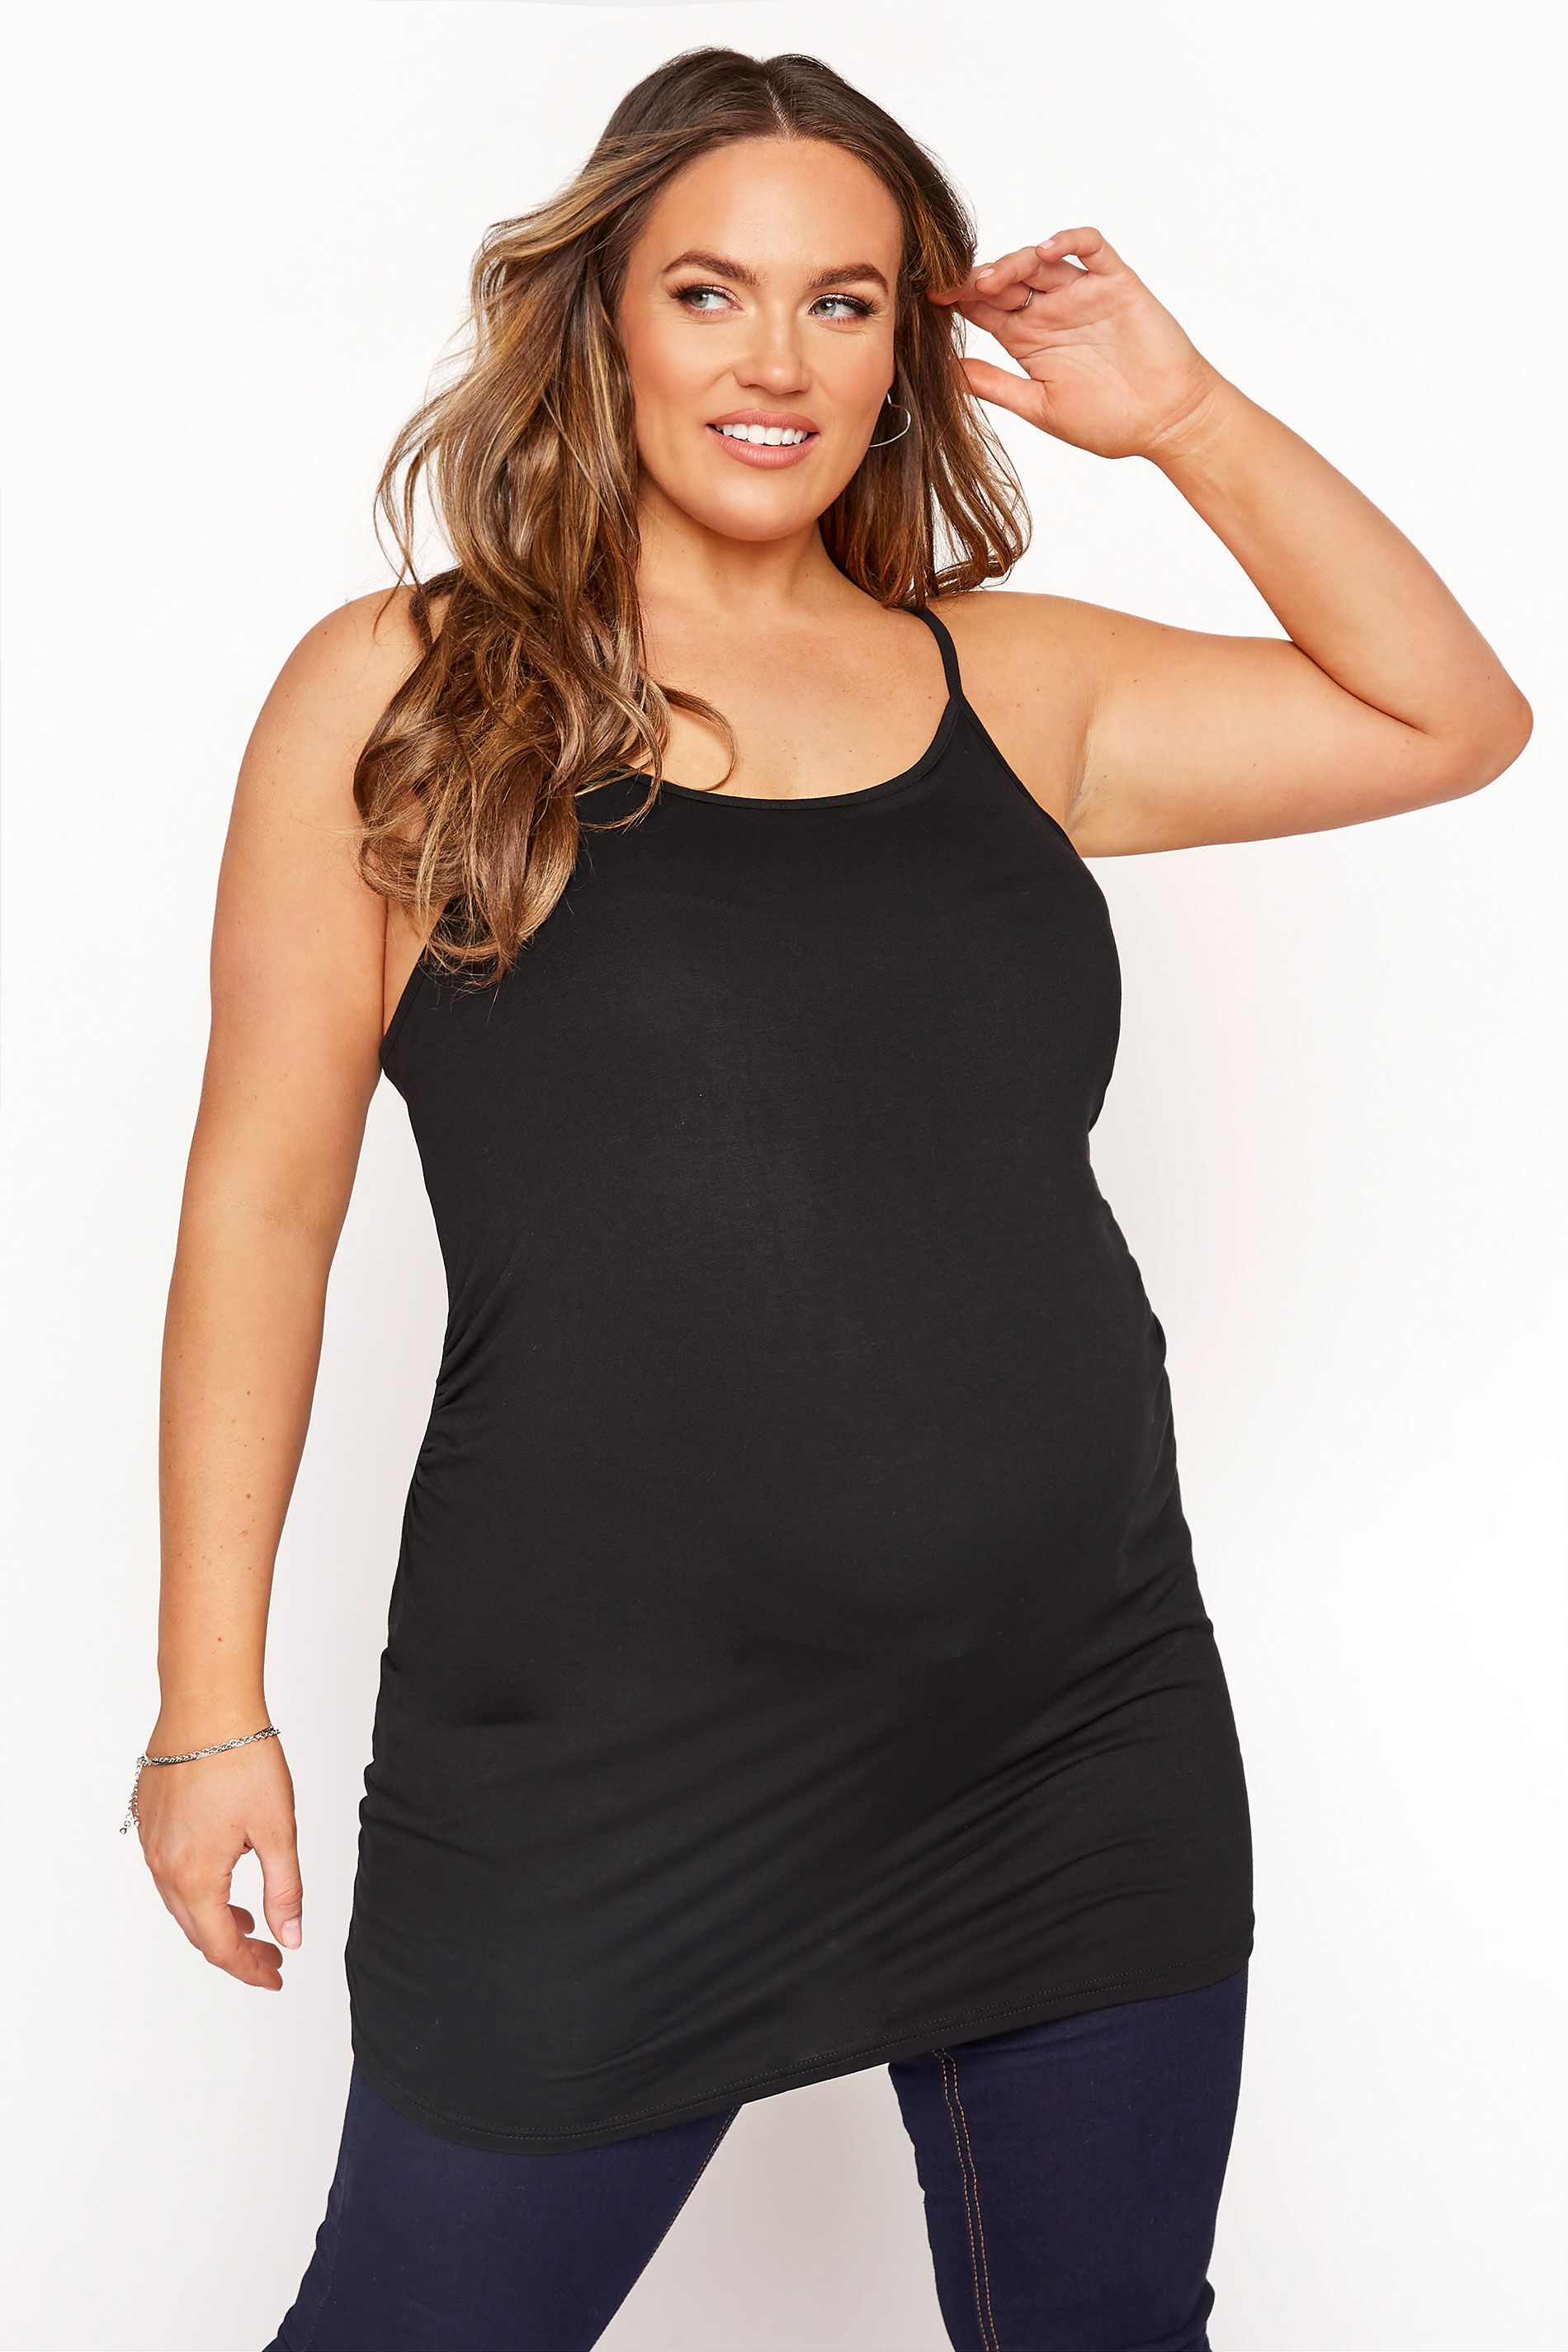 Yours Clothing Bump it up maternity black cami with secret support